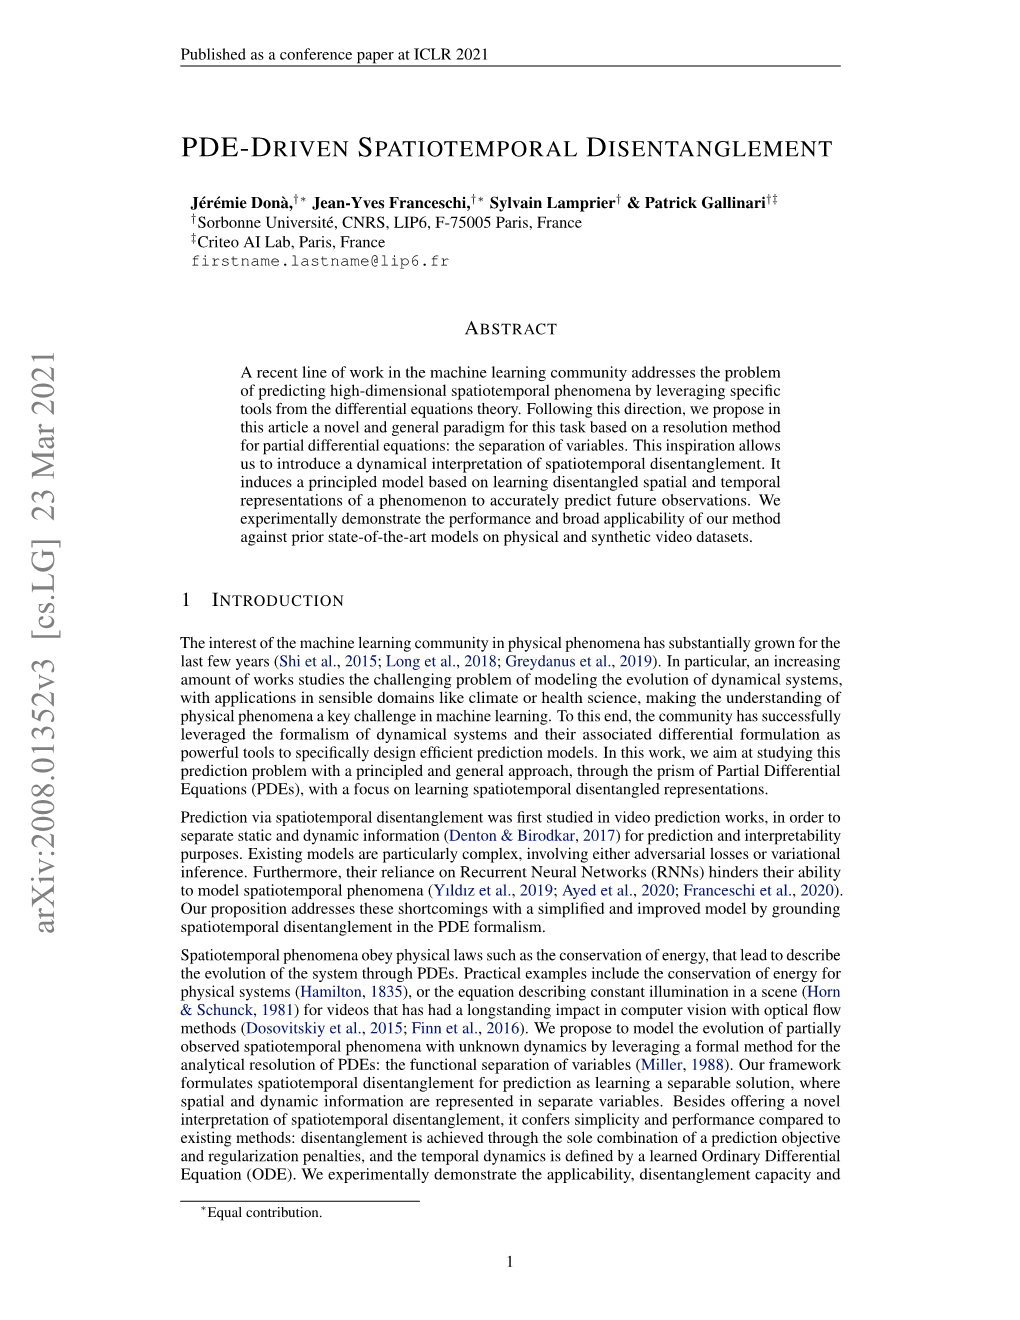 Arxiv:2008.01352V3 [Cs.LG] 23 Mar 2021 Spatiotemporal Disentanglement in the PDE Formalism